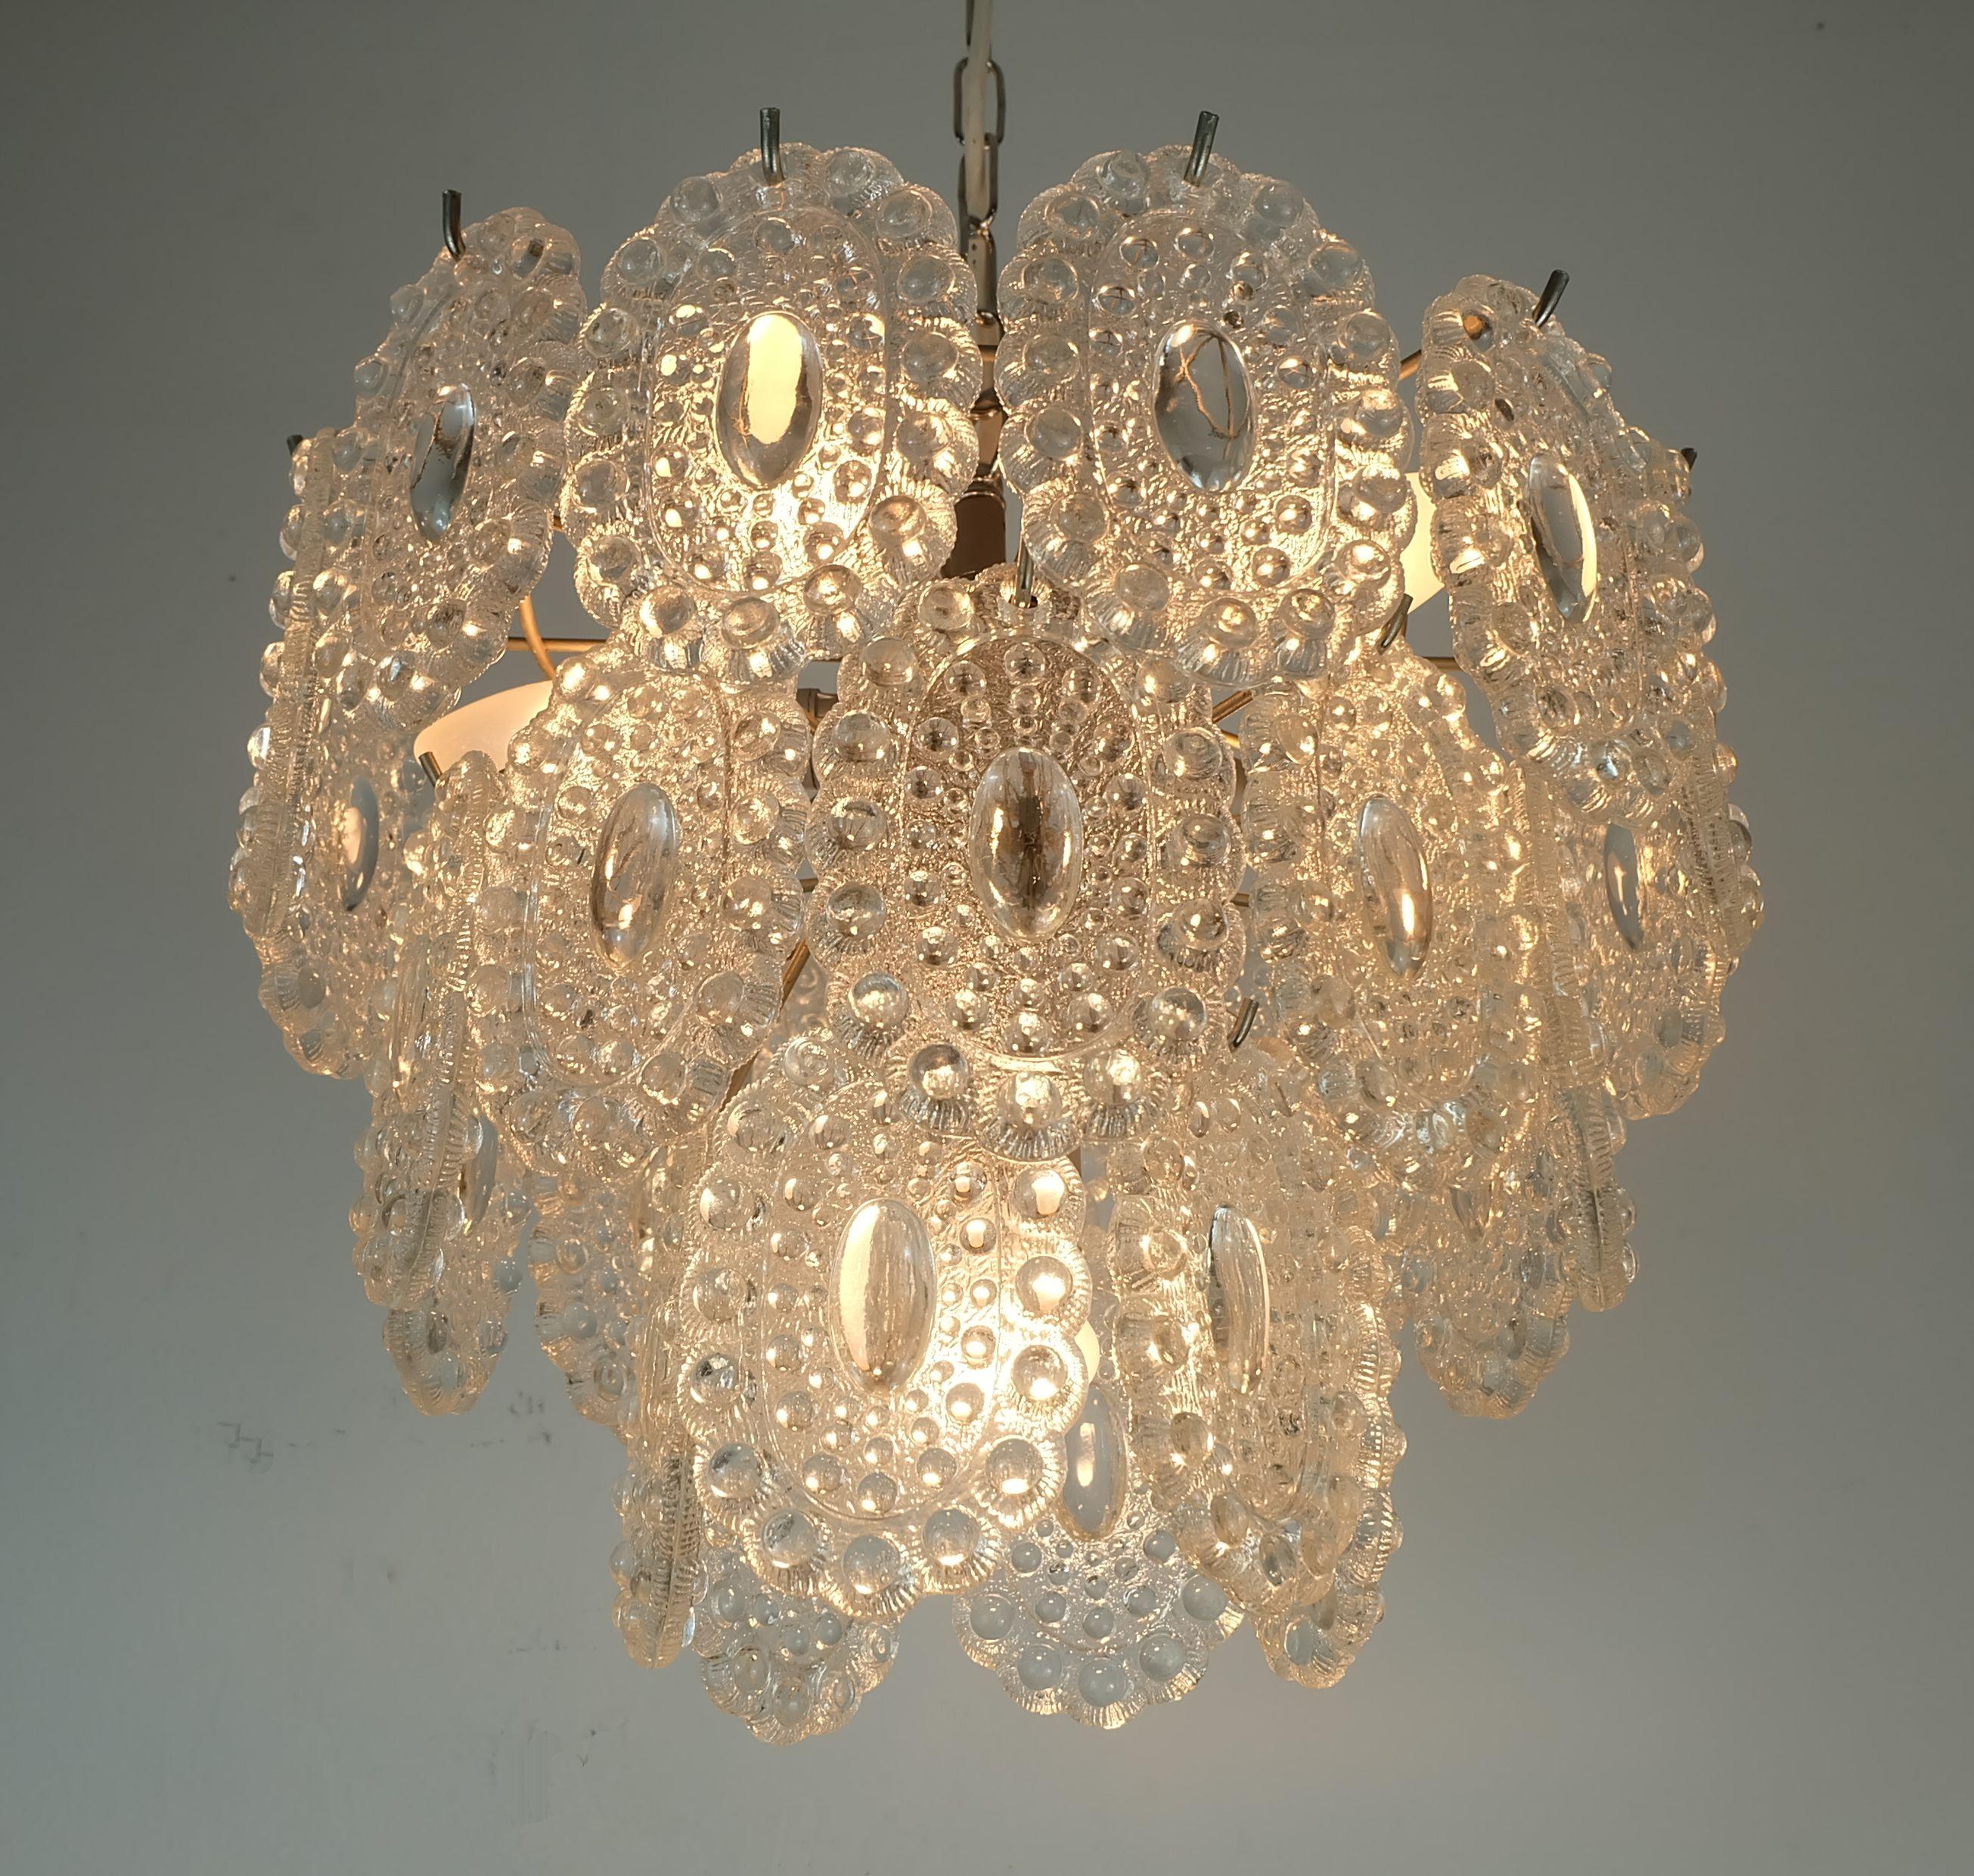 3-tier PENDANT LIGHT with 29 oval glass discs graewe chandelier 1960s For Sale 2